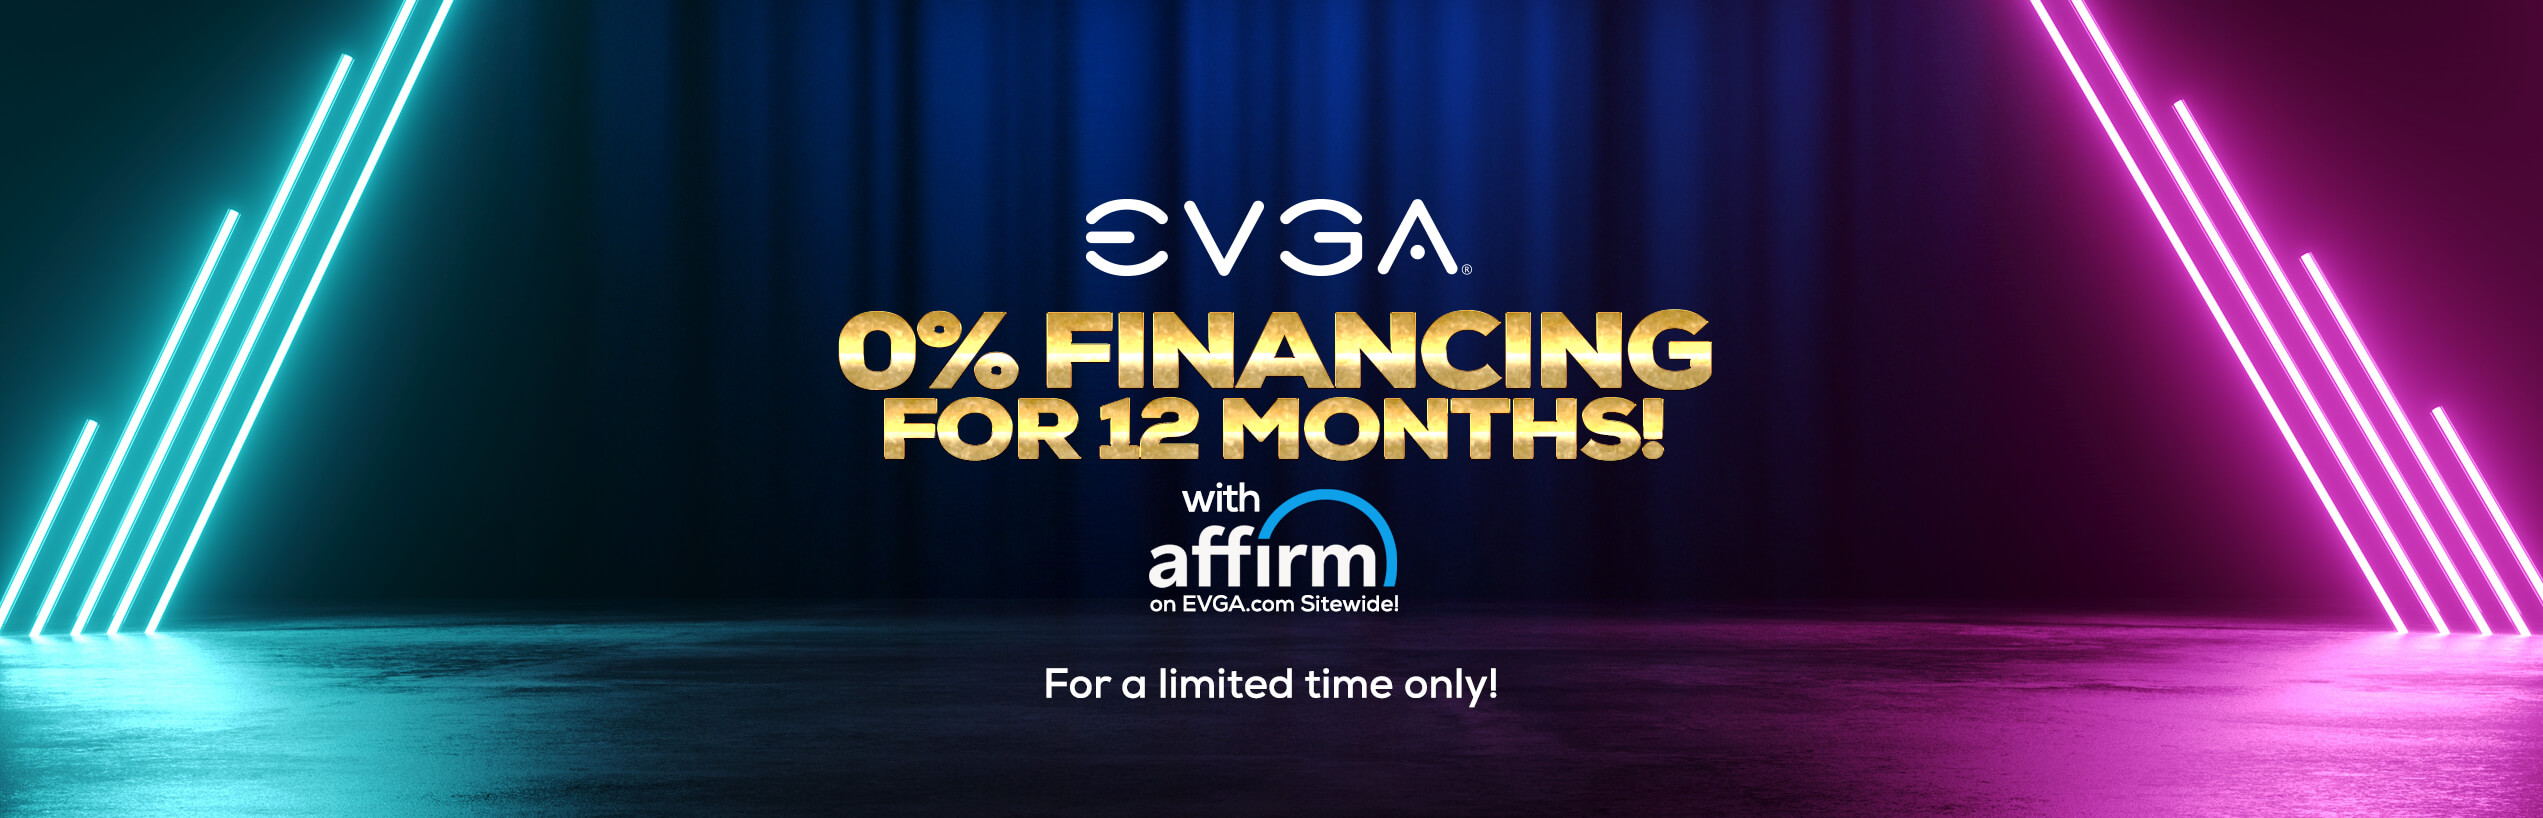 0% Financing for 12 Months!